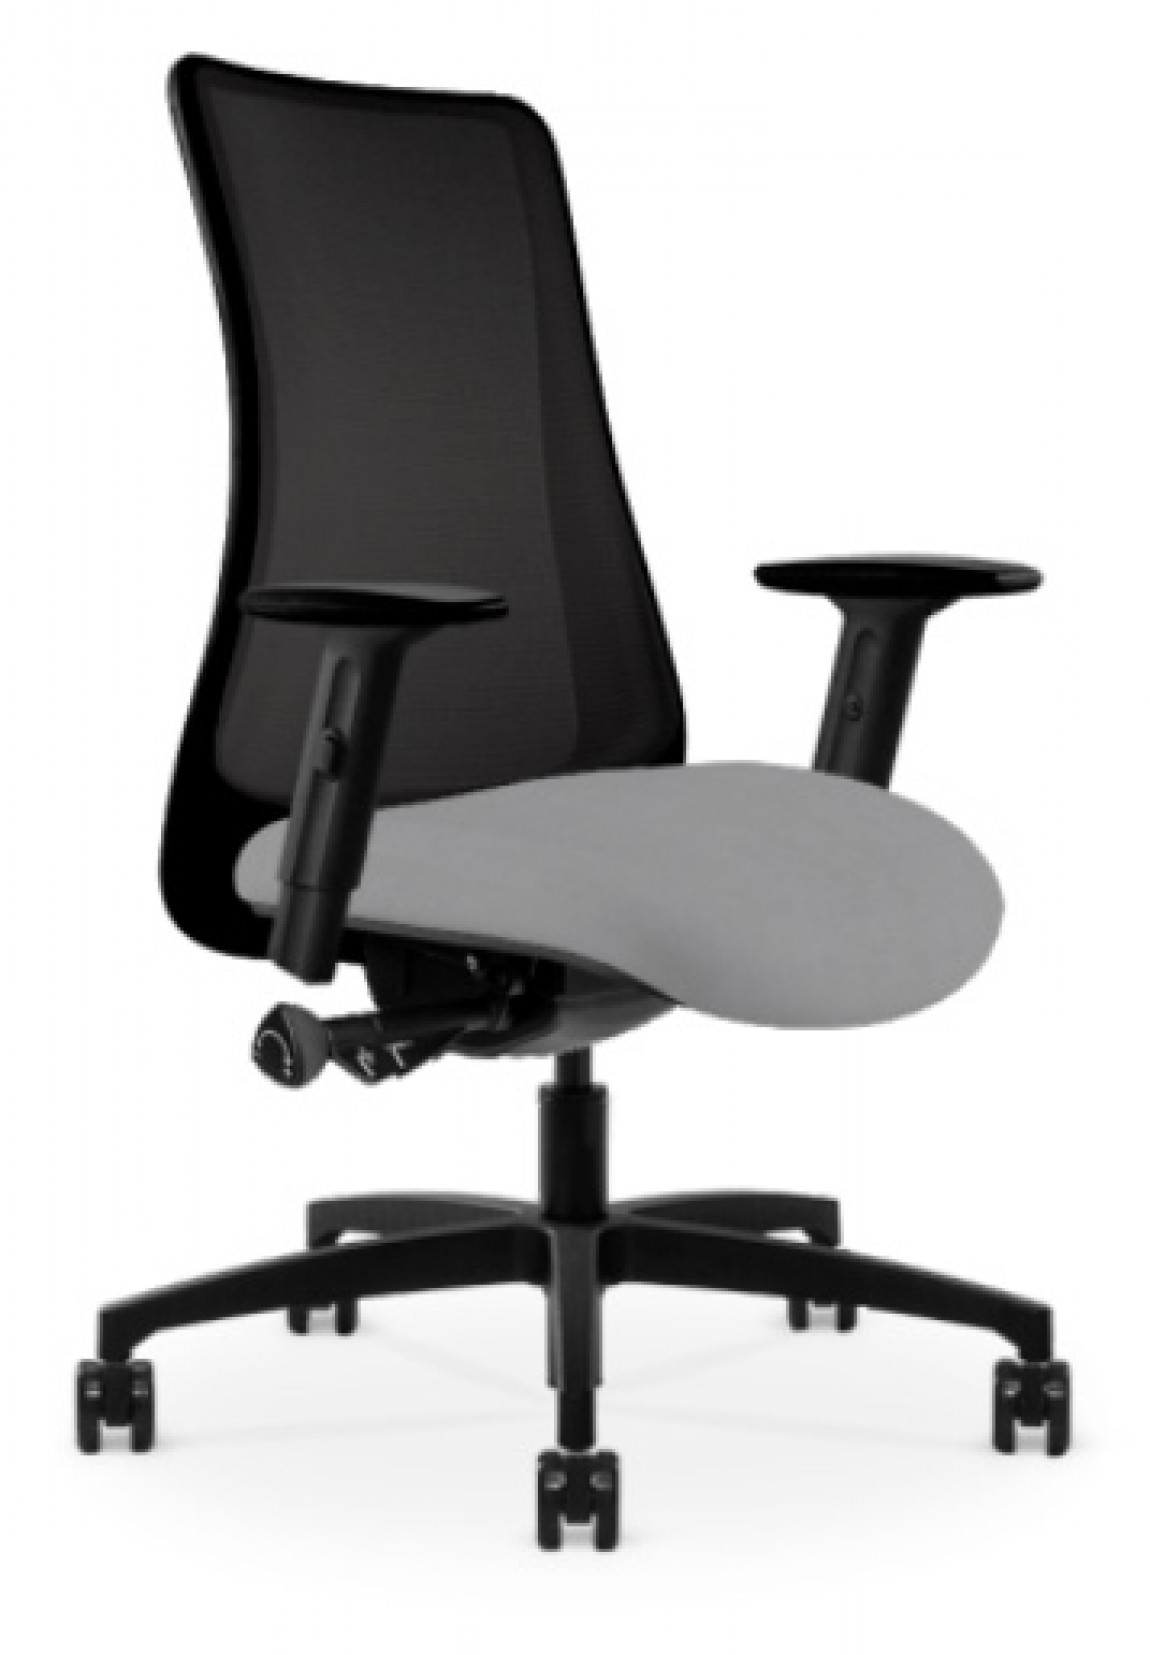 Black Copper Mesh Antimicrobial Office Chair w/ Light Gray Seat